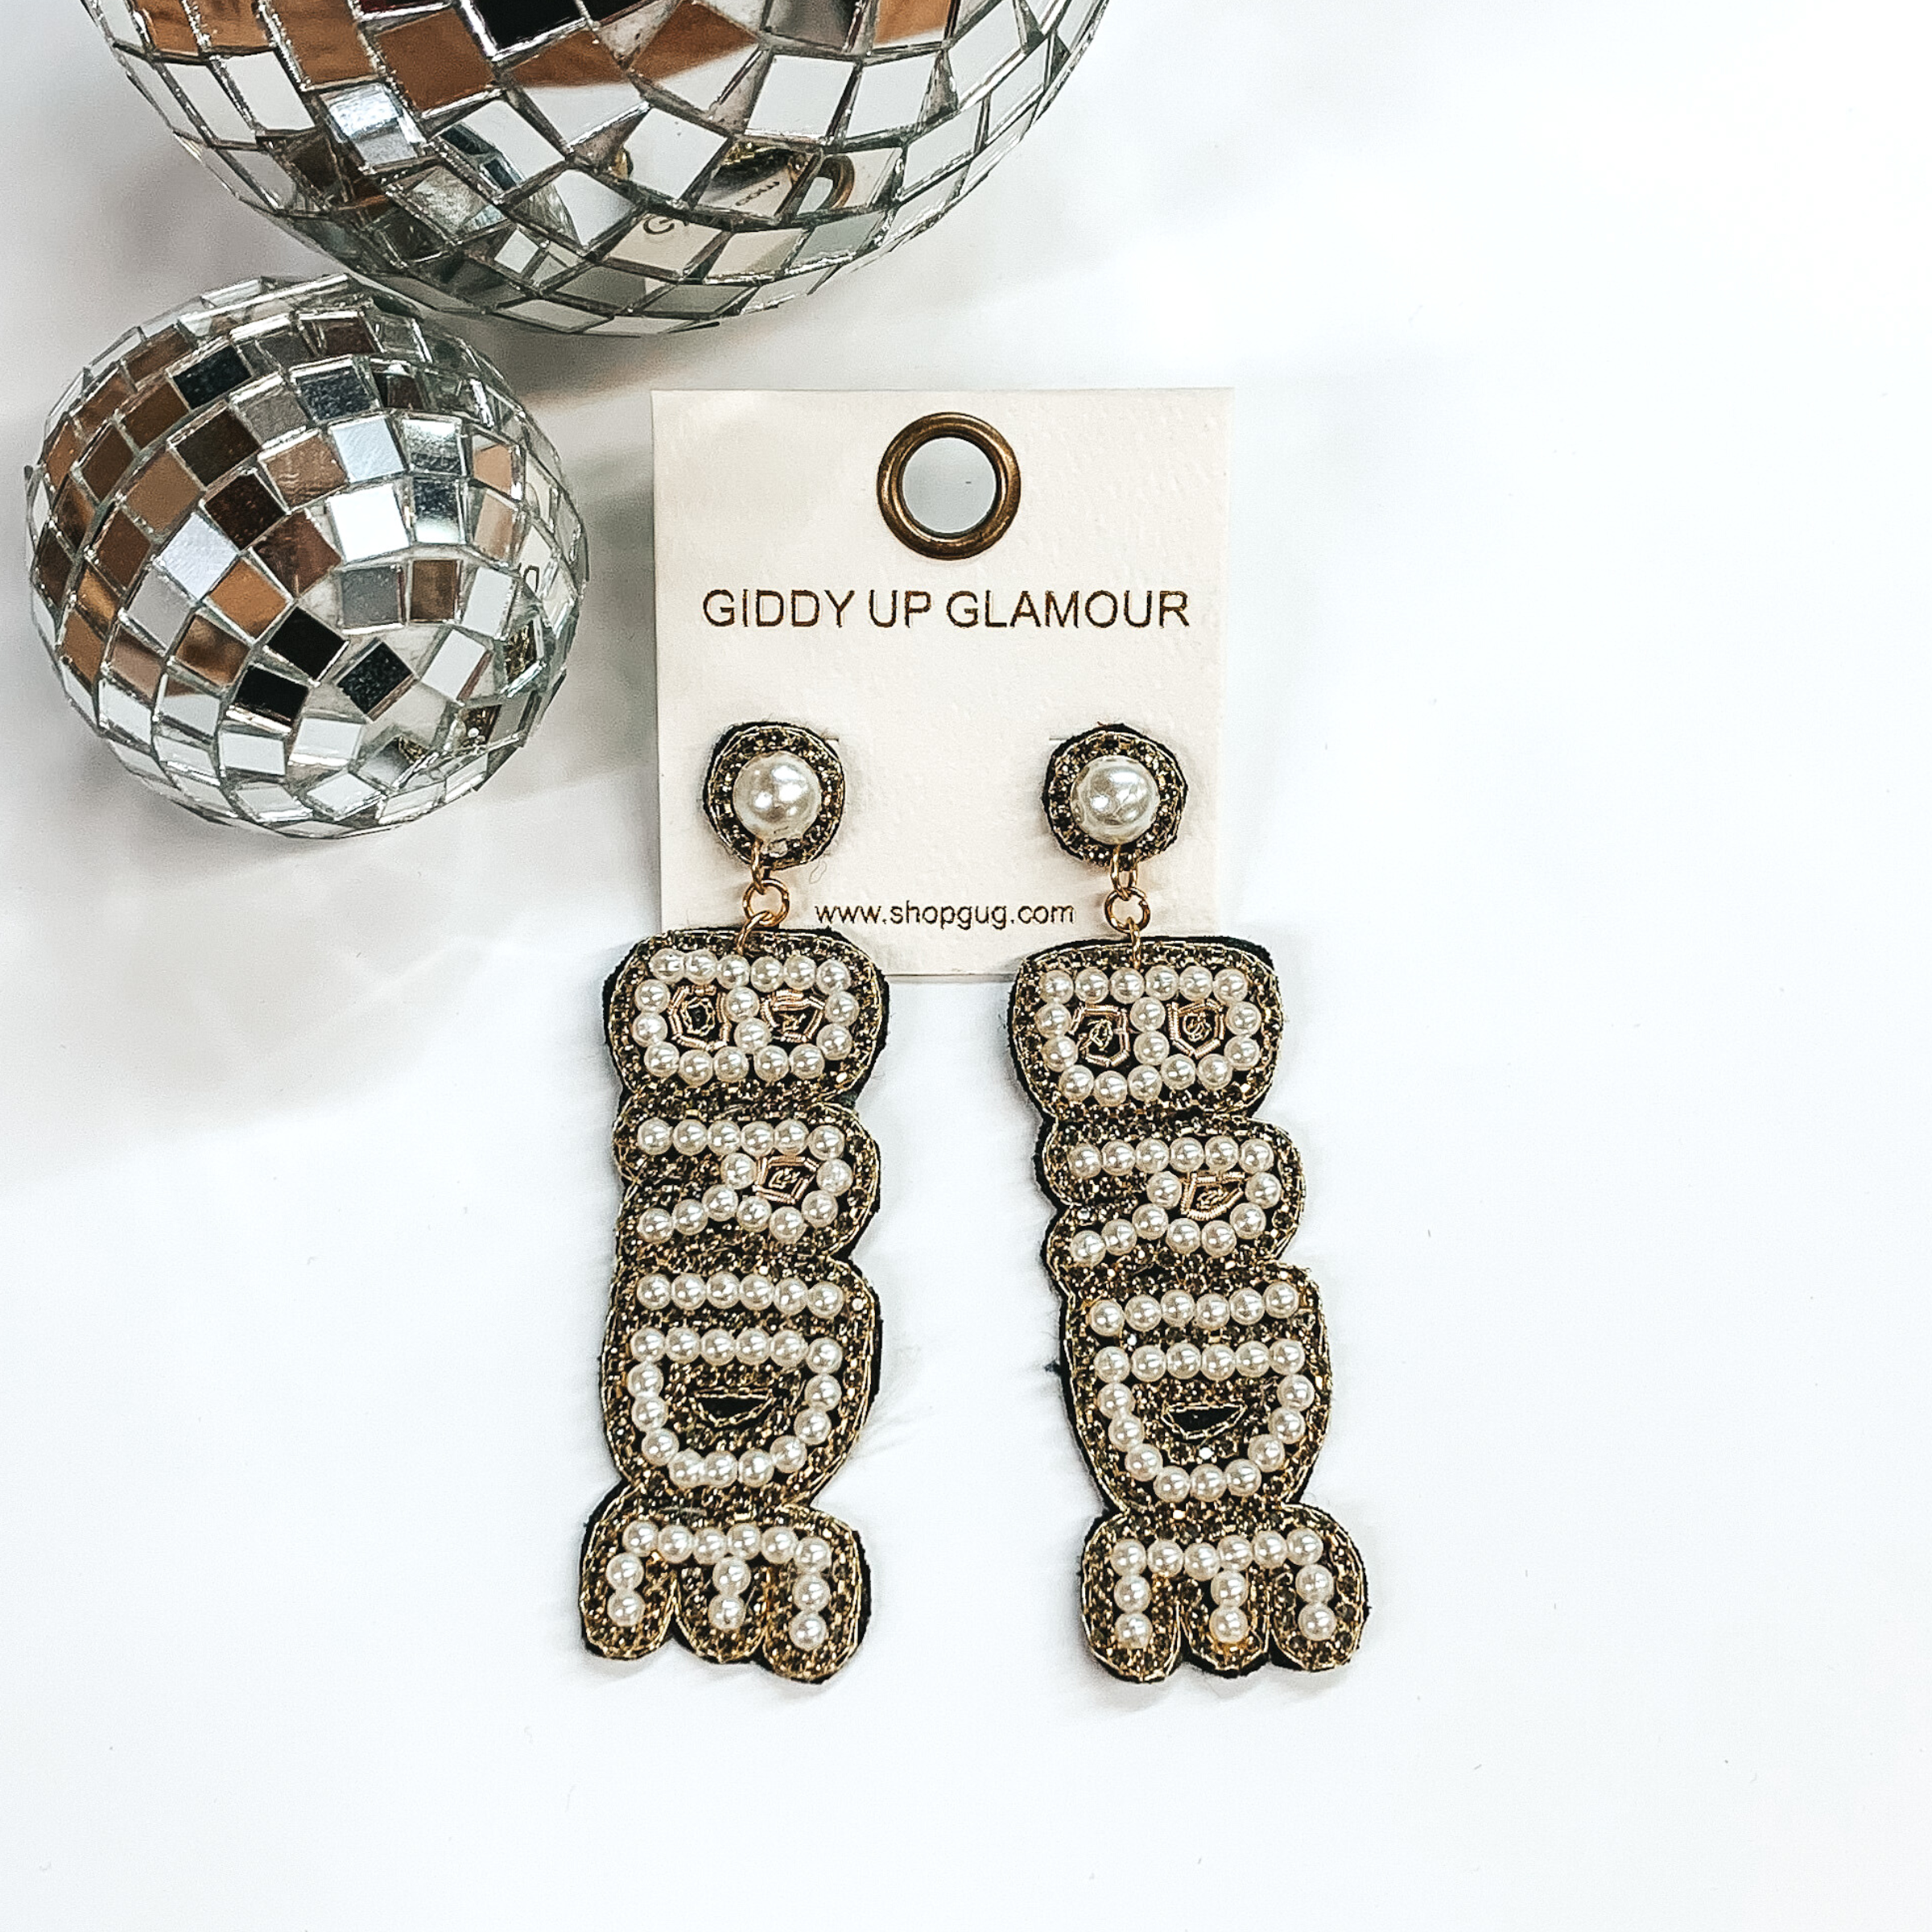 White pearl beaded "BRIDE" drop earrings surrounded by grey crystals and gold stitching. These earrings are pictured on a white background with disco balls in the top left corner.